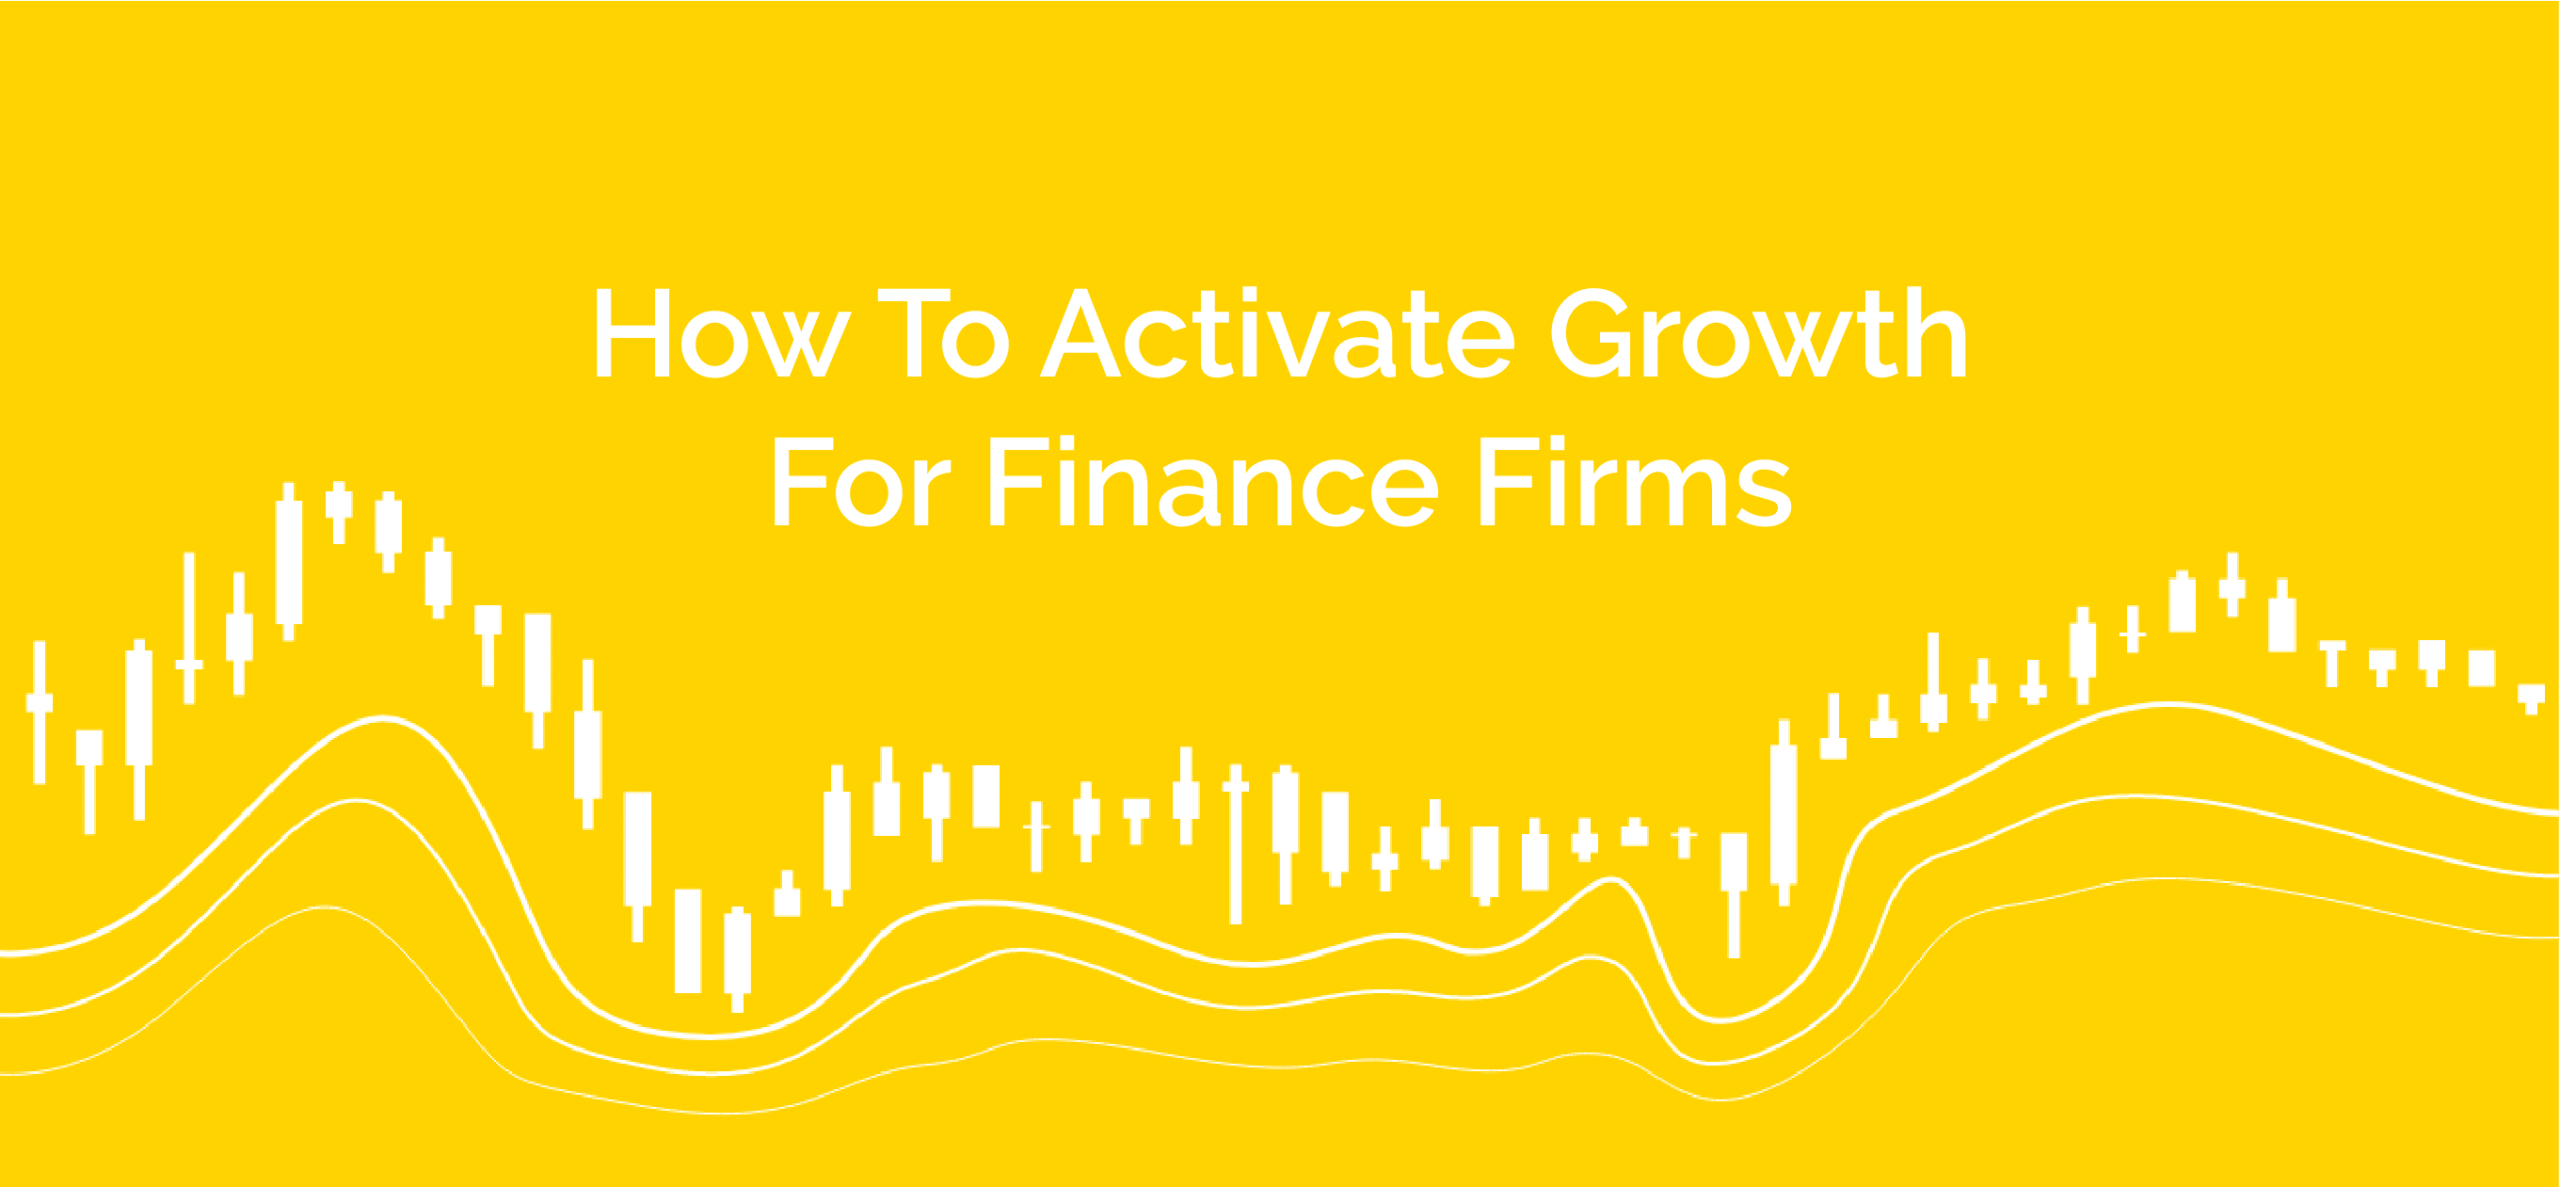 How To Activate Growth For Finance Firms